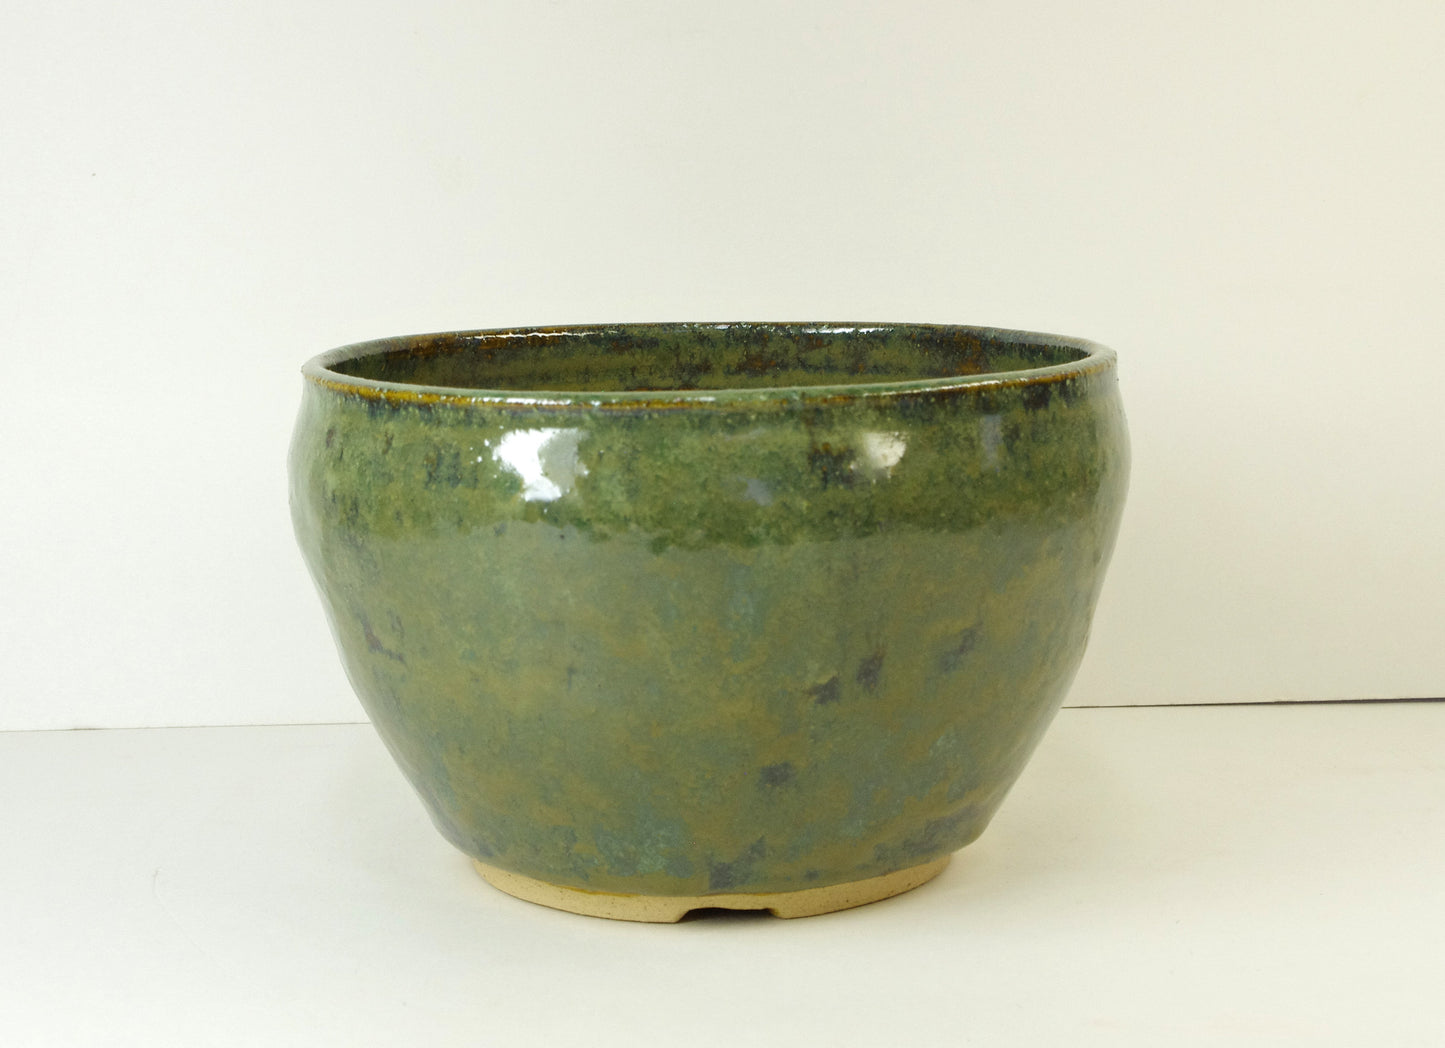 2110, Hand Thrown Stoneware Bonsai Pot,  Greens, Tans  6 3/8 x 4 1/8, With Extra Wire Holes